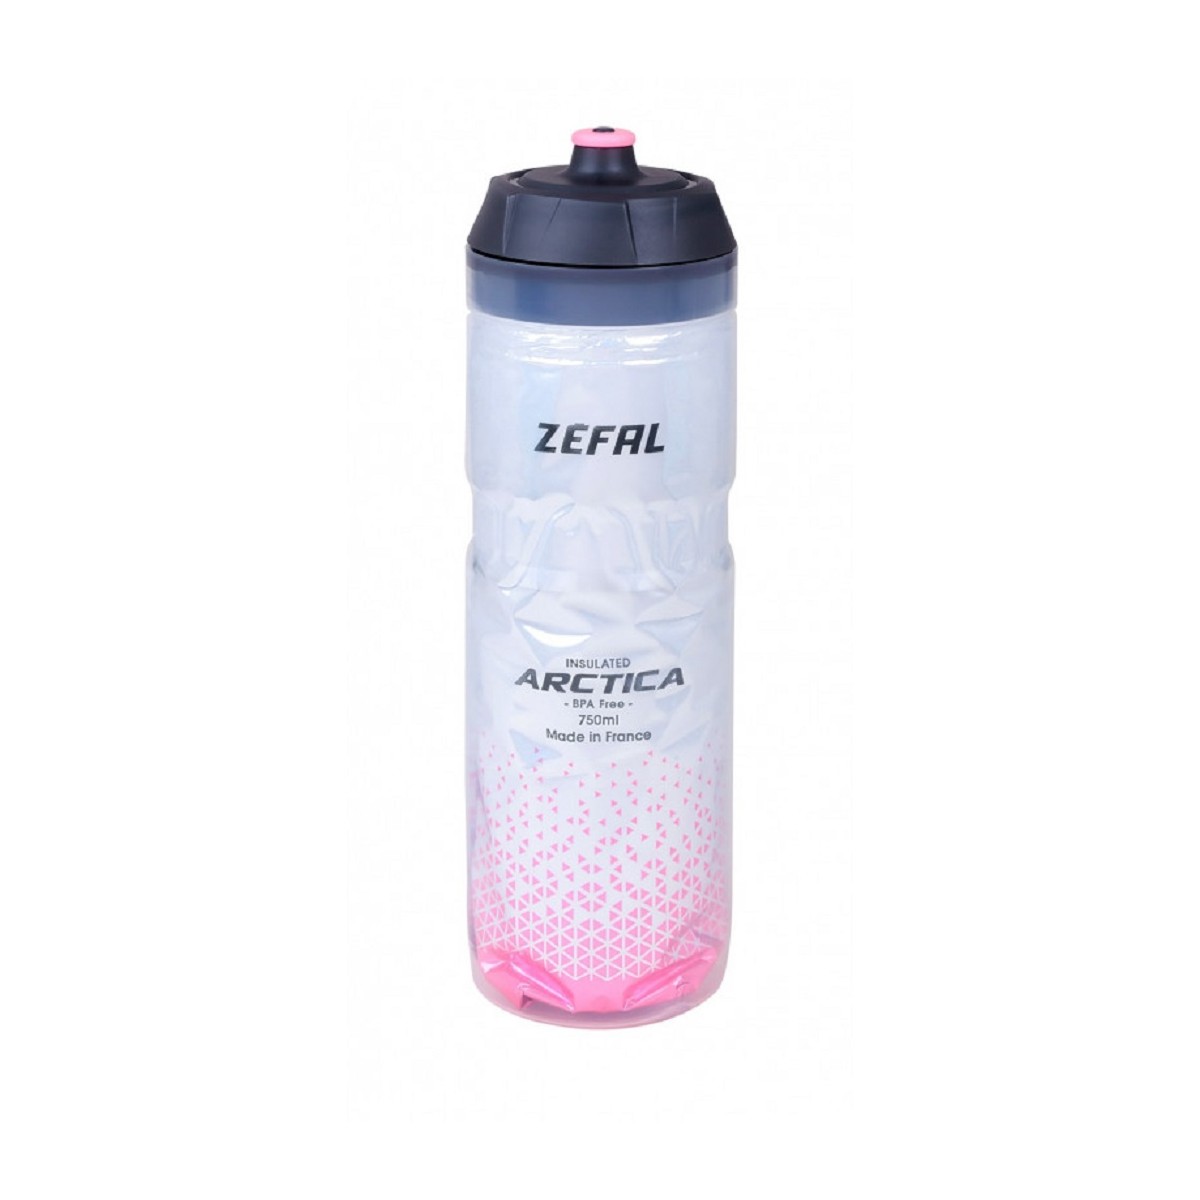 ZEFAL ARCTICA 75 750ML thermo bottle pink / grey